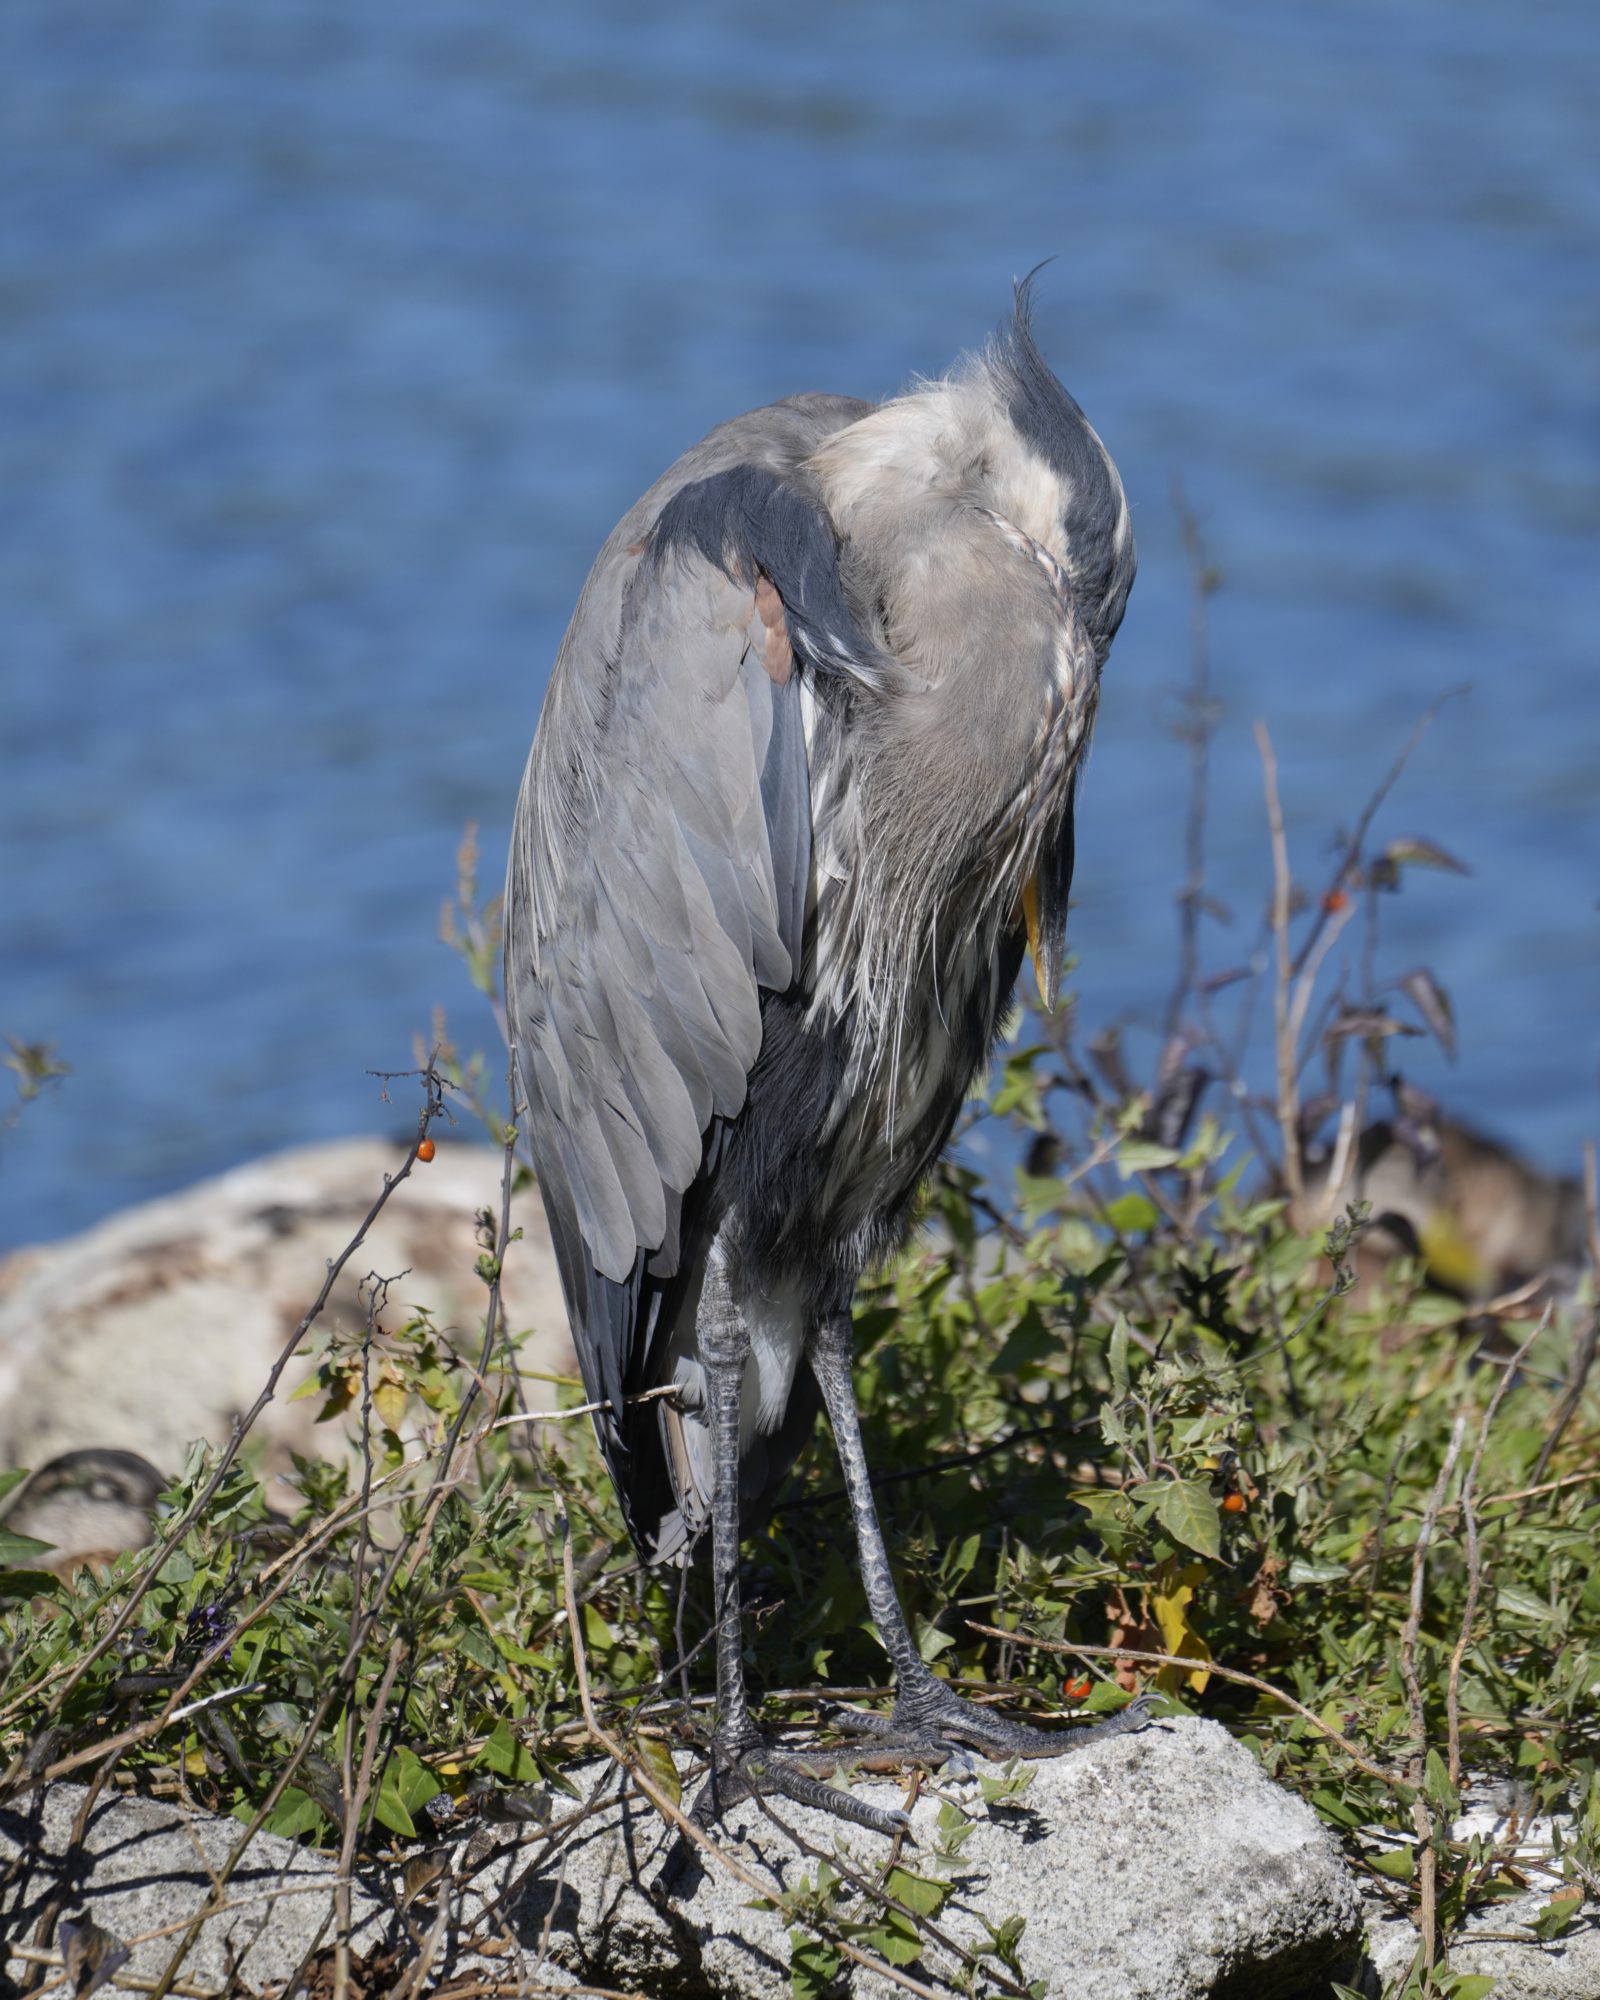 A Great Blue Heron standing with its head tucked under its wing, on a small island in Lost Lagoon